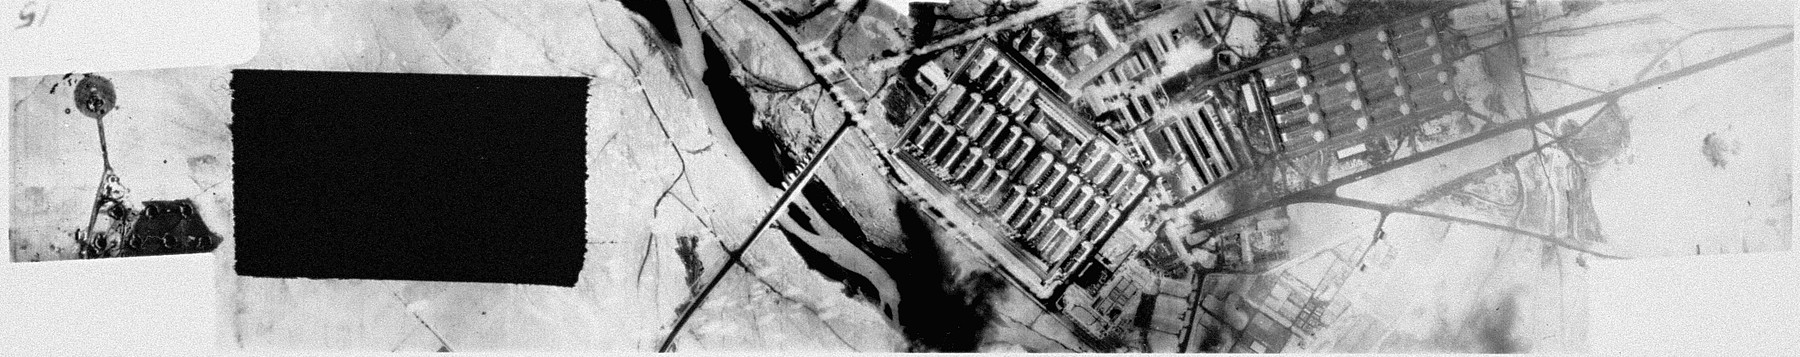 An aerial reconnaissance photograph showing Auschwitz I  including the barracks and administration building.